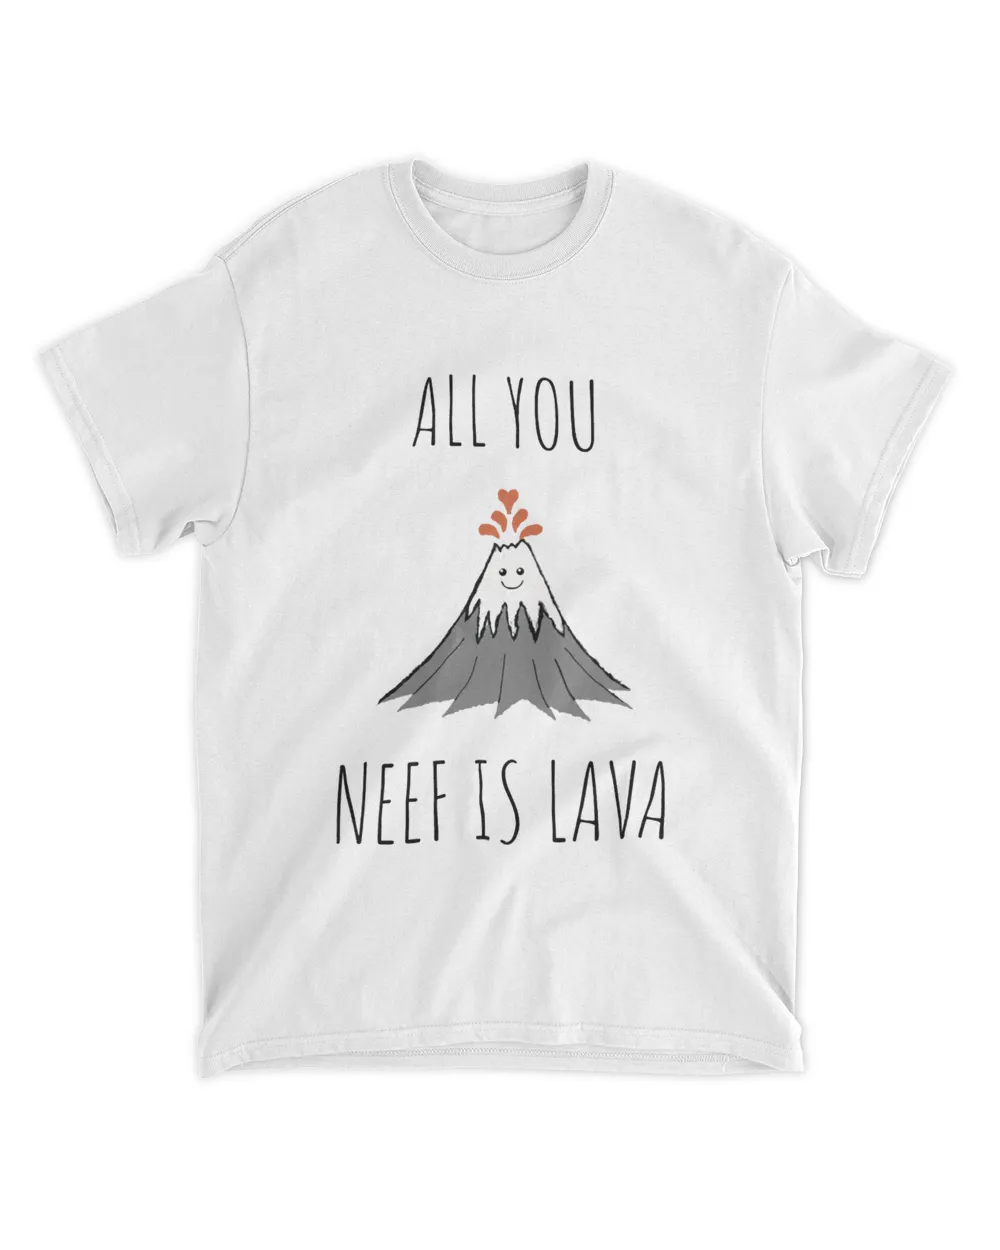 All You Need Is Lava shirt